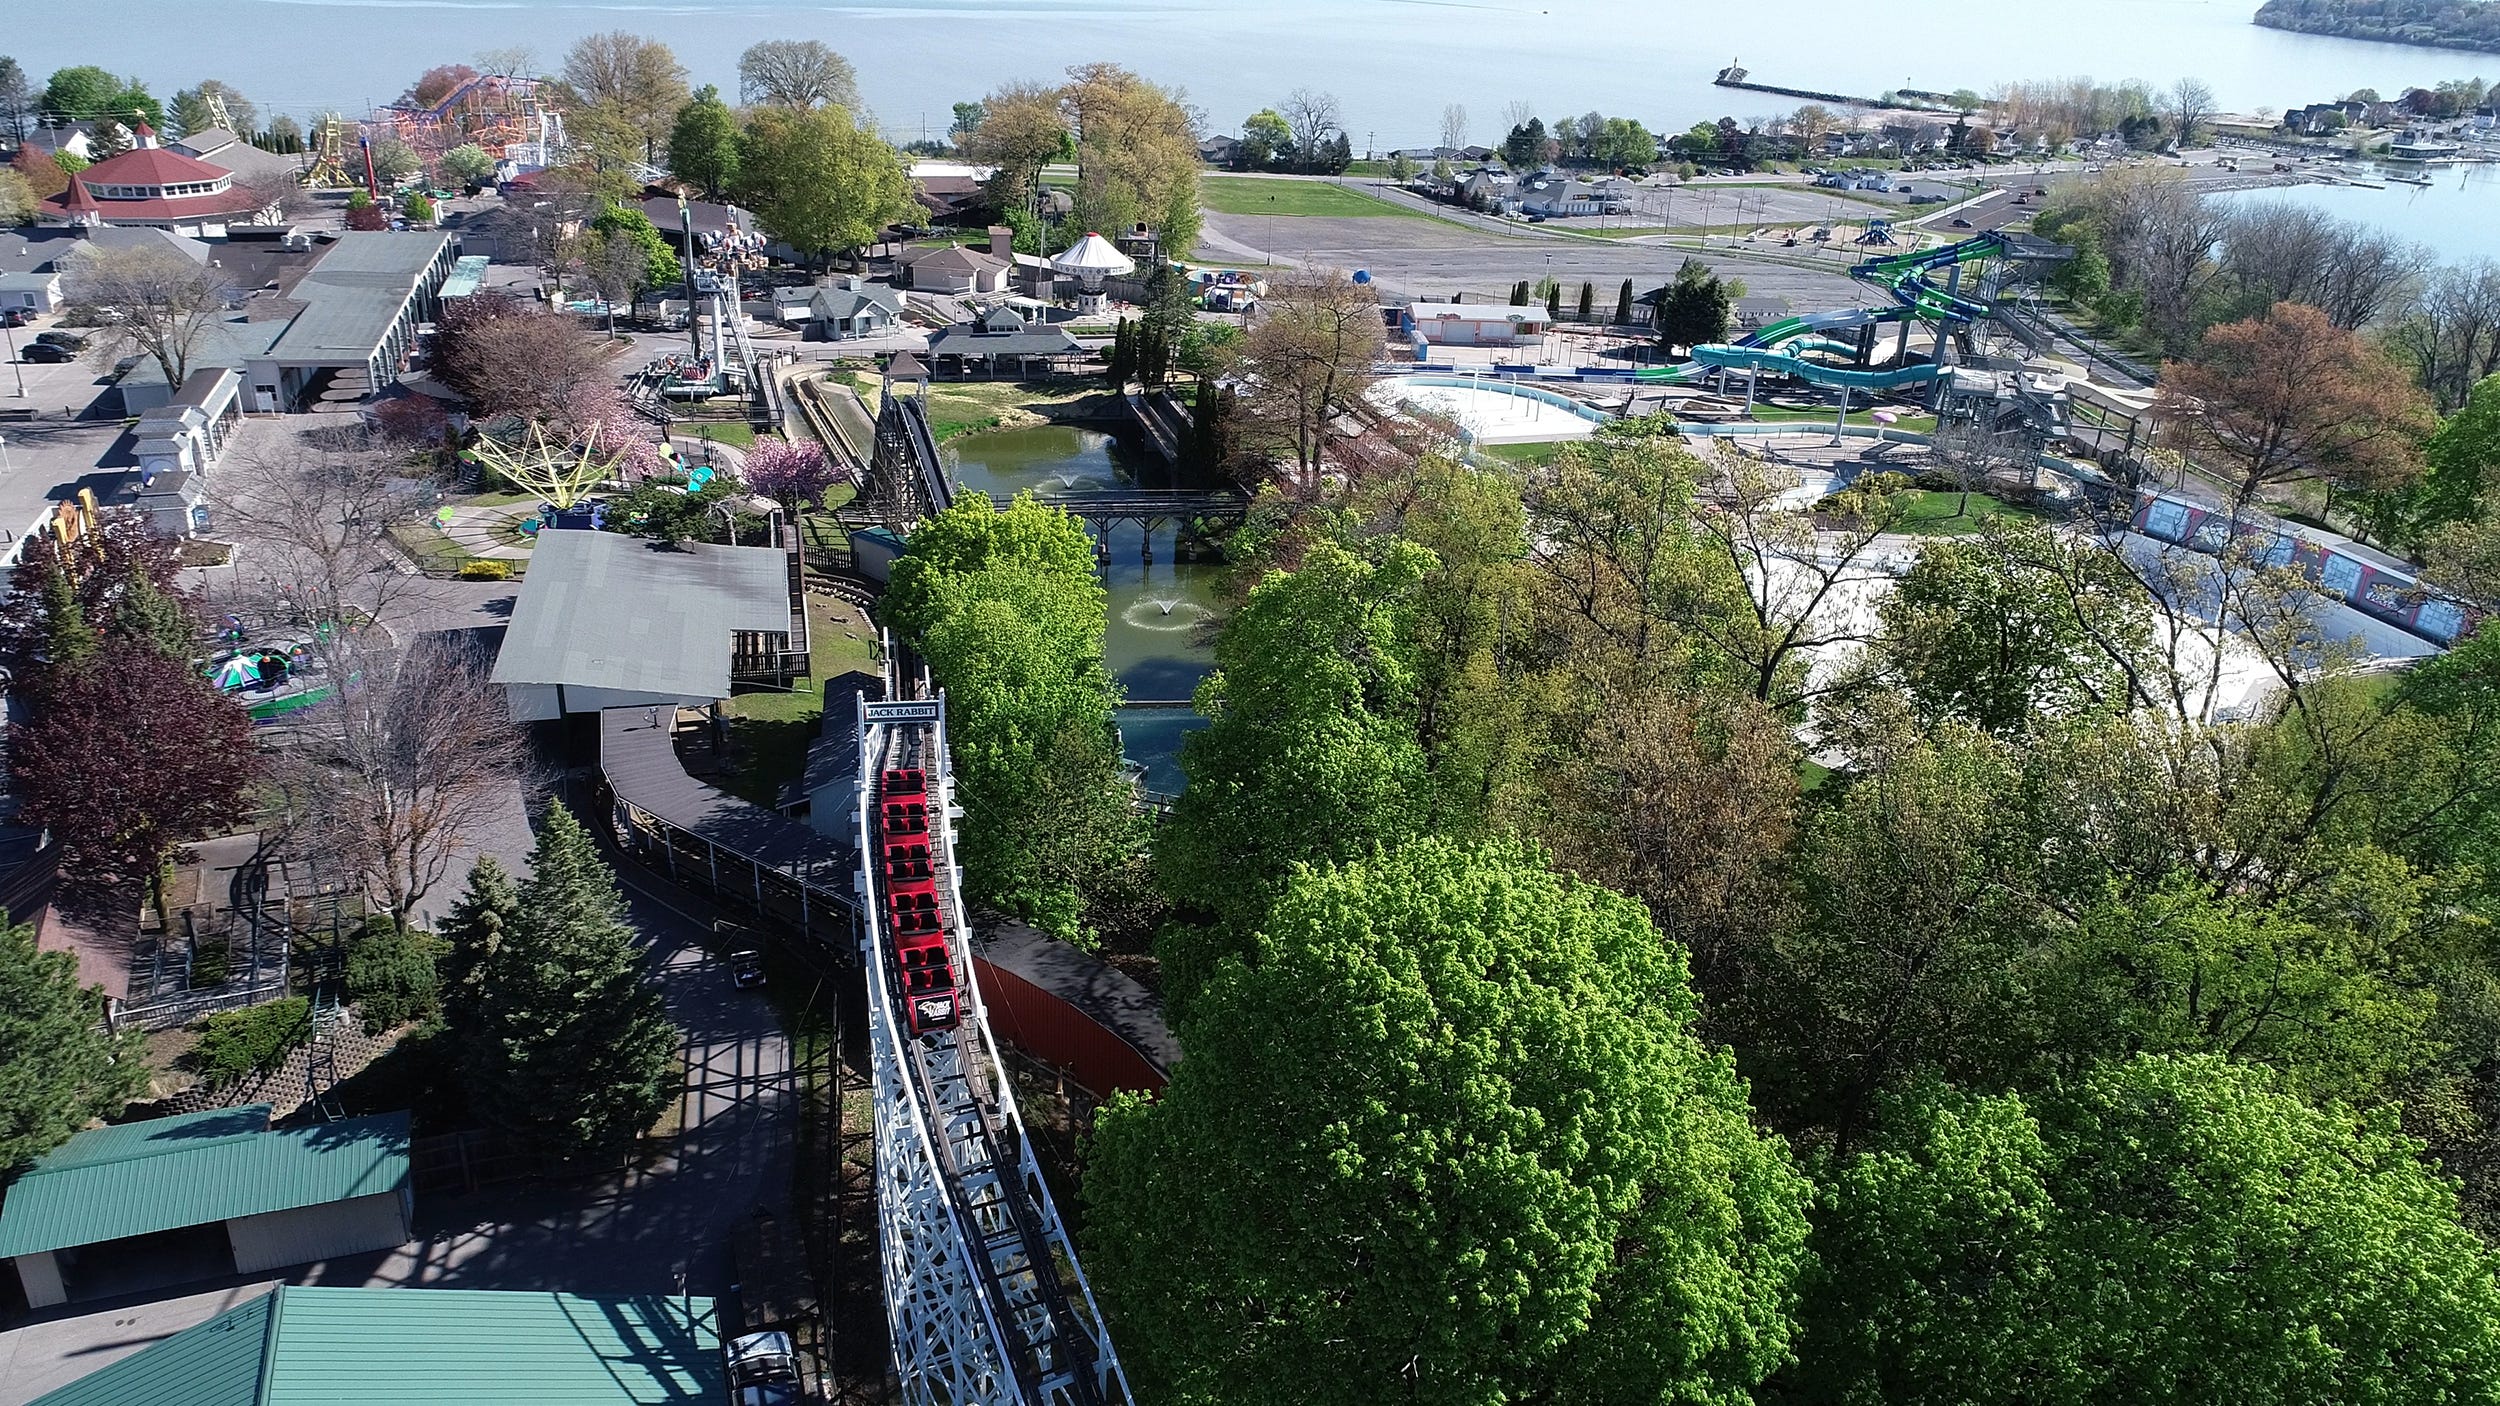 The Jack Rabbit rollercoaster goes up over its highest point with a view of Lake Ontario and part of Irondequoit Bay at Seabreeze Amusement Park in Irondequoit on May 14. The park was closed last year due to COVID-19 and will be open only on weekends until the end of June, when it will be open seven days a week.